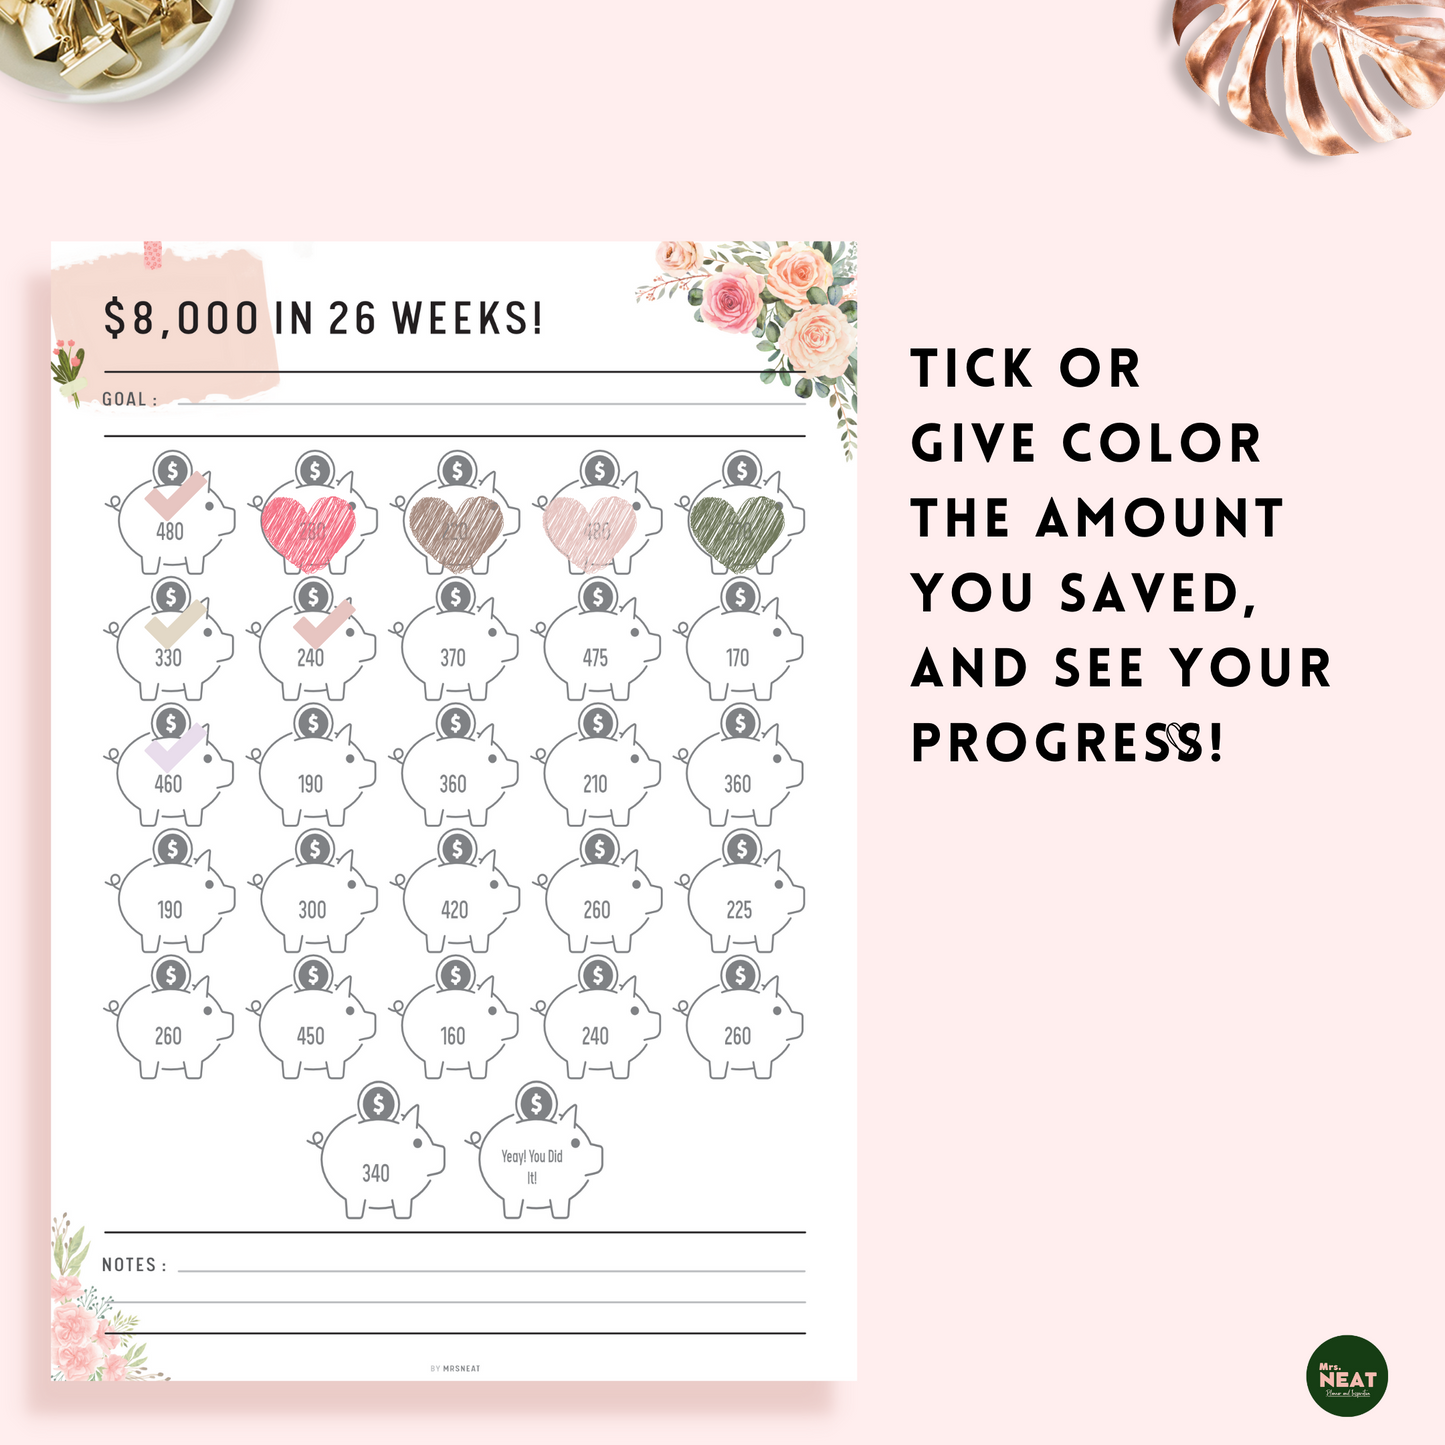 Colorful Piggy Bank on Beautiful Pink Floral $8000 Money Saving Challenge Planner in 26 Weeks 